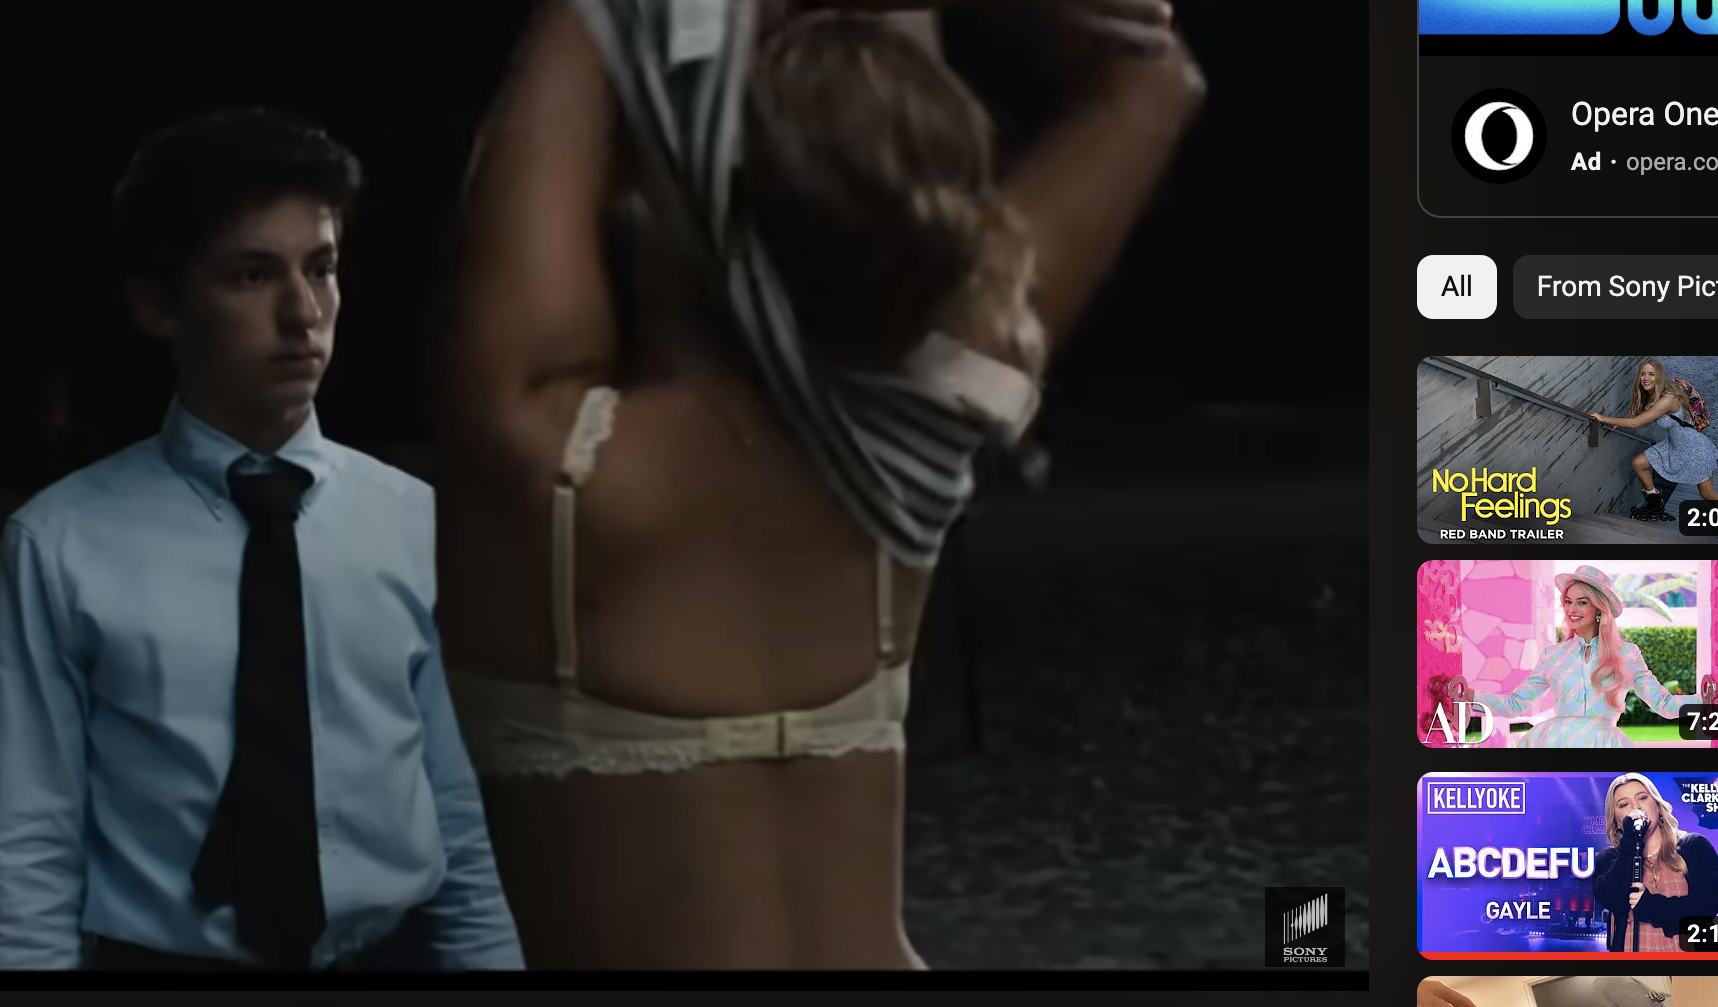 Maddie takes her top off as Percy looks on in a scene from the film